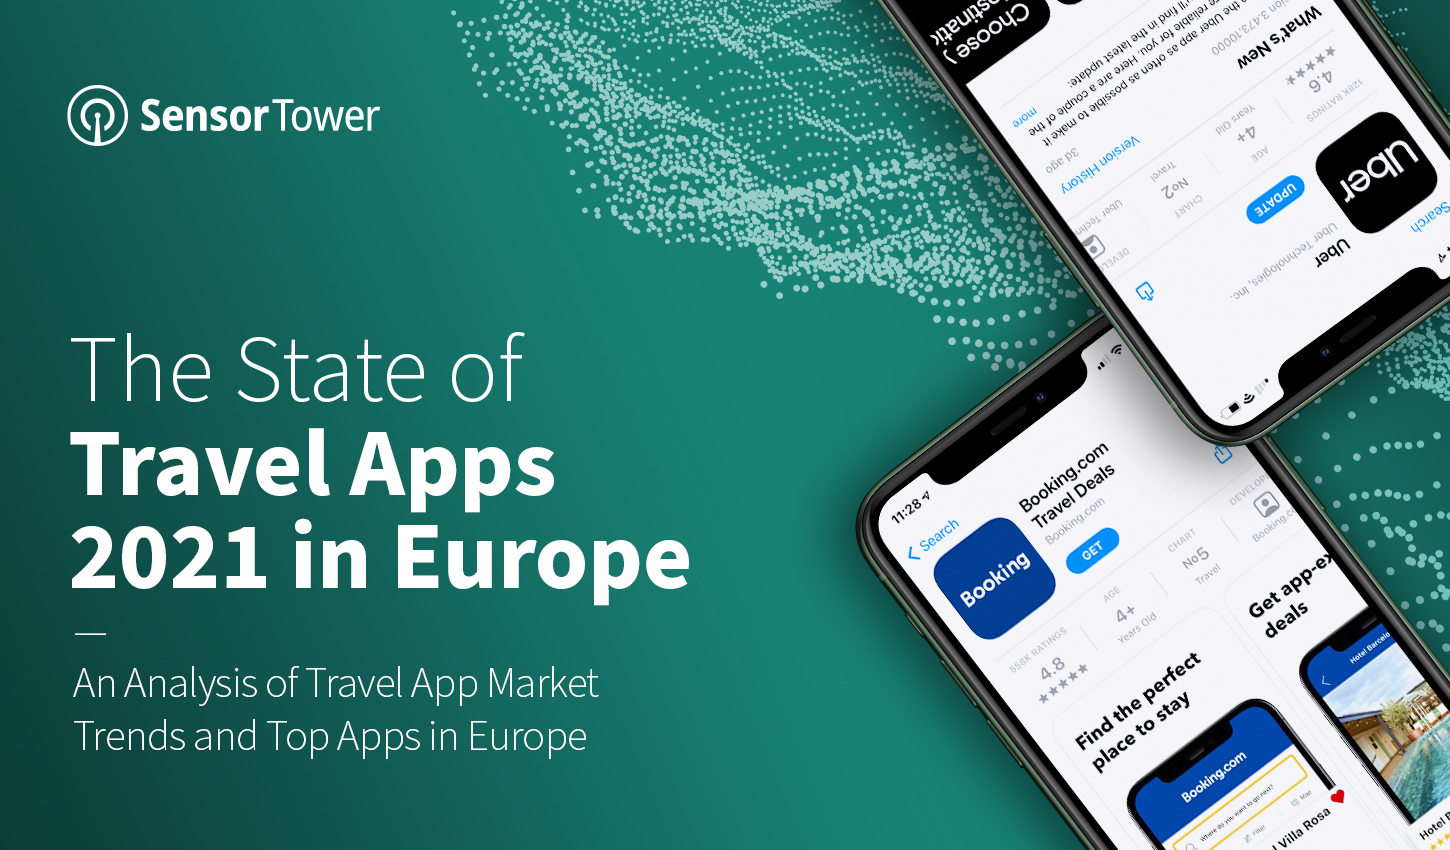 Takeaways from Sensor Tower's State of Travel Apps in Europe Report